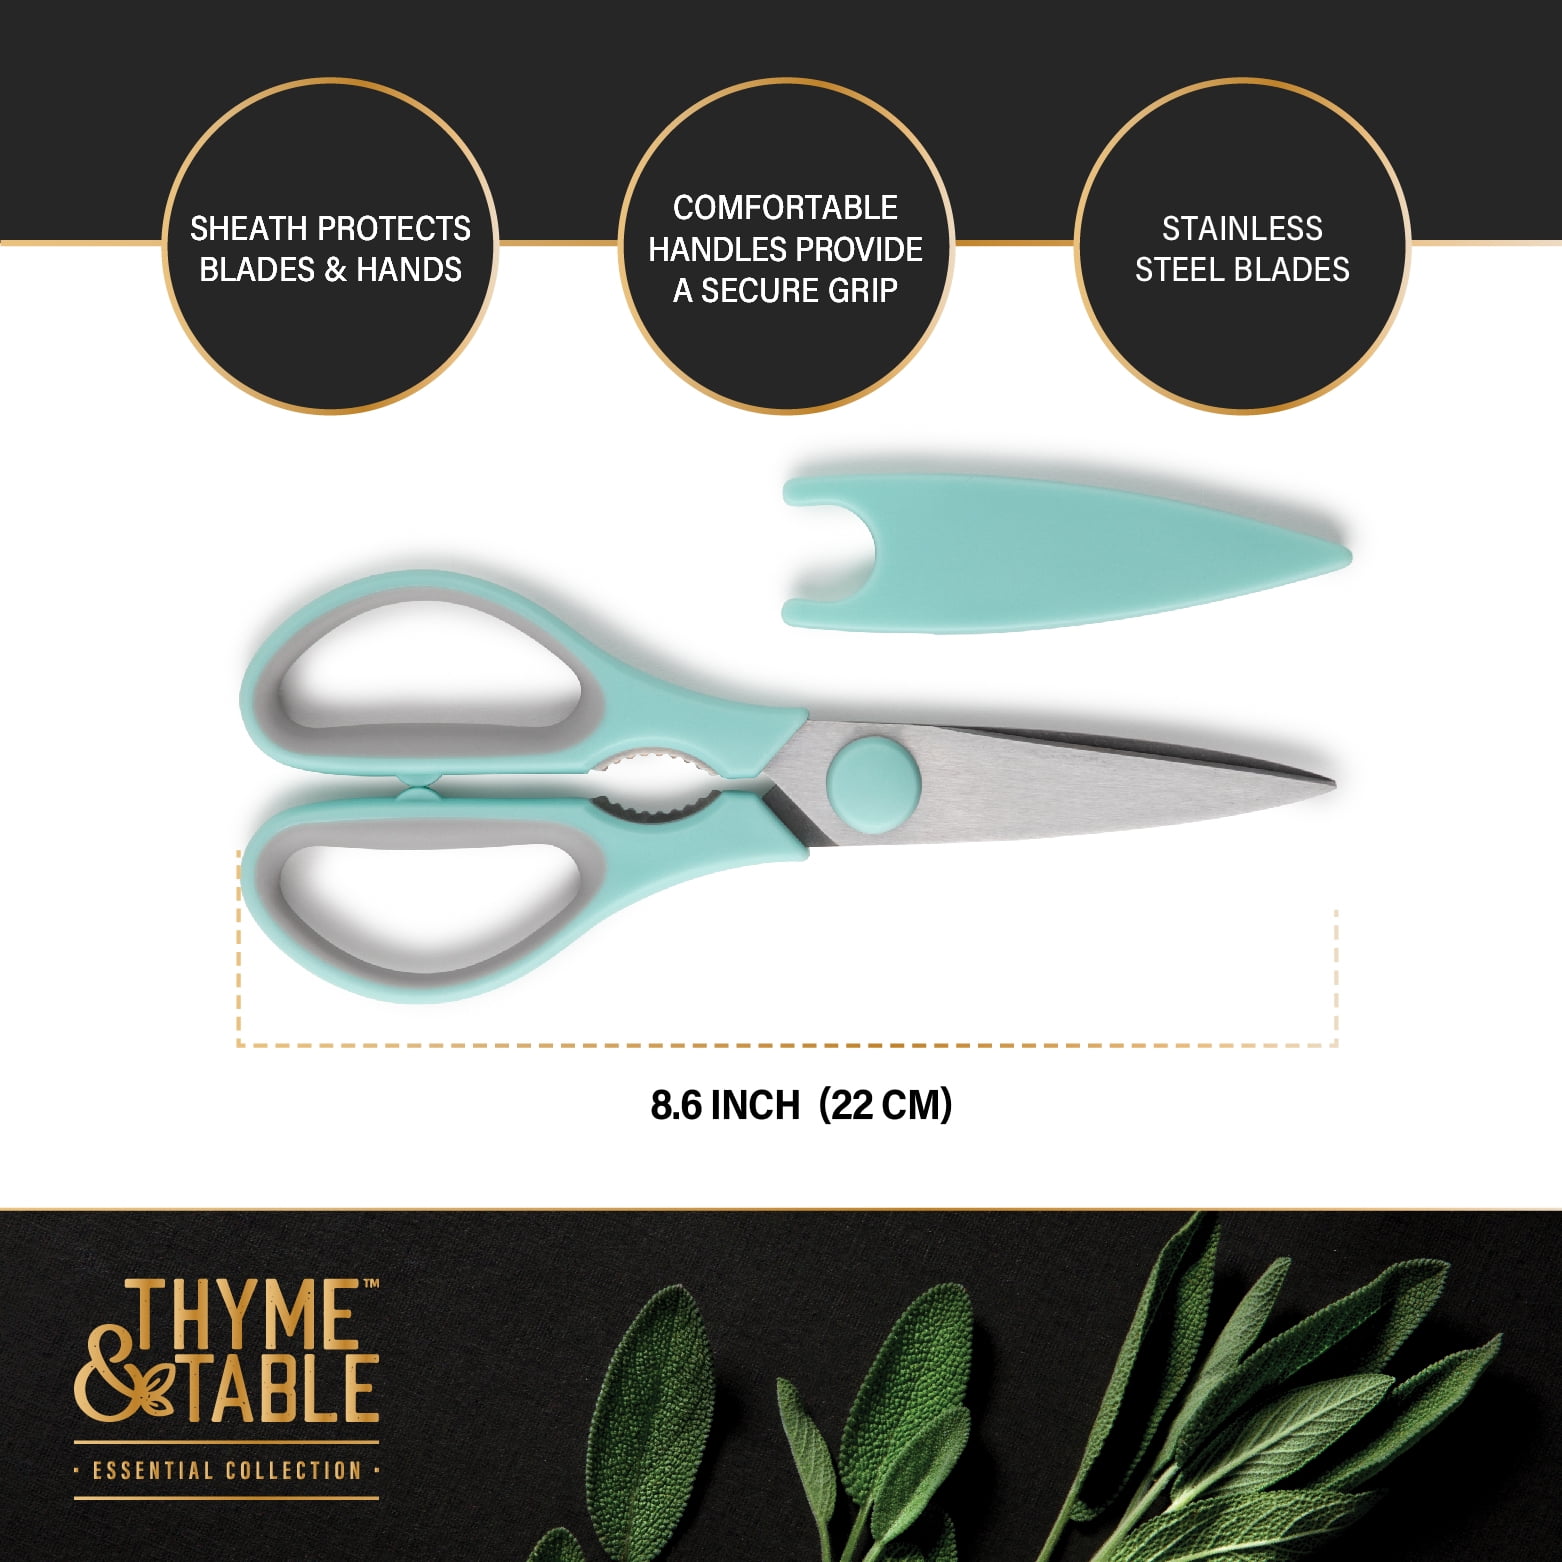 Thyme and Table Stainless Steel Kitchen Shears, Coral 